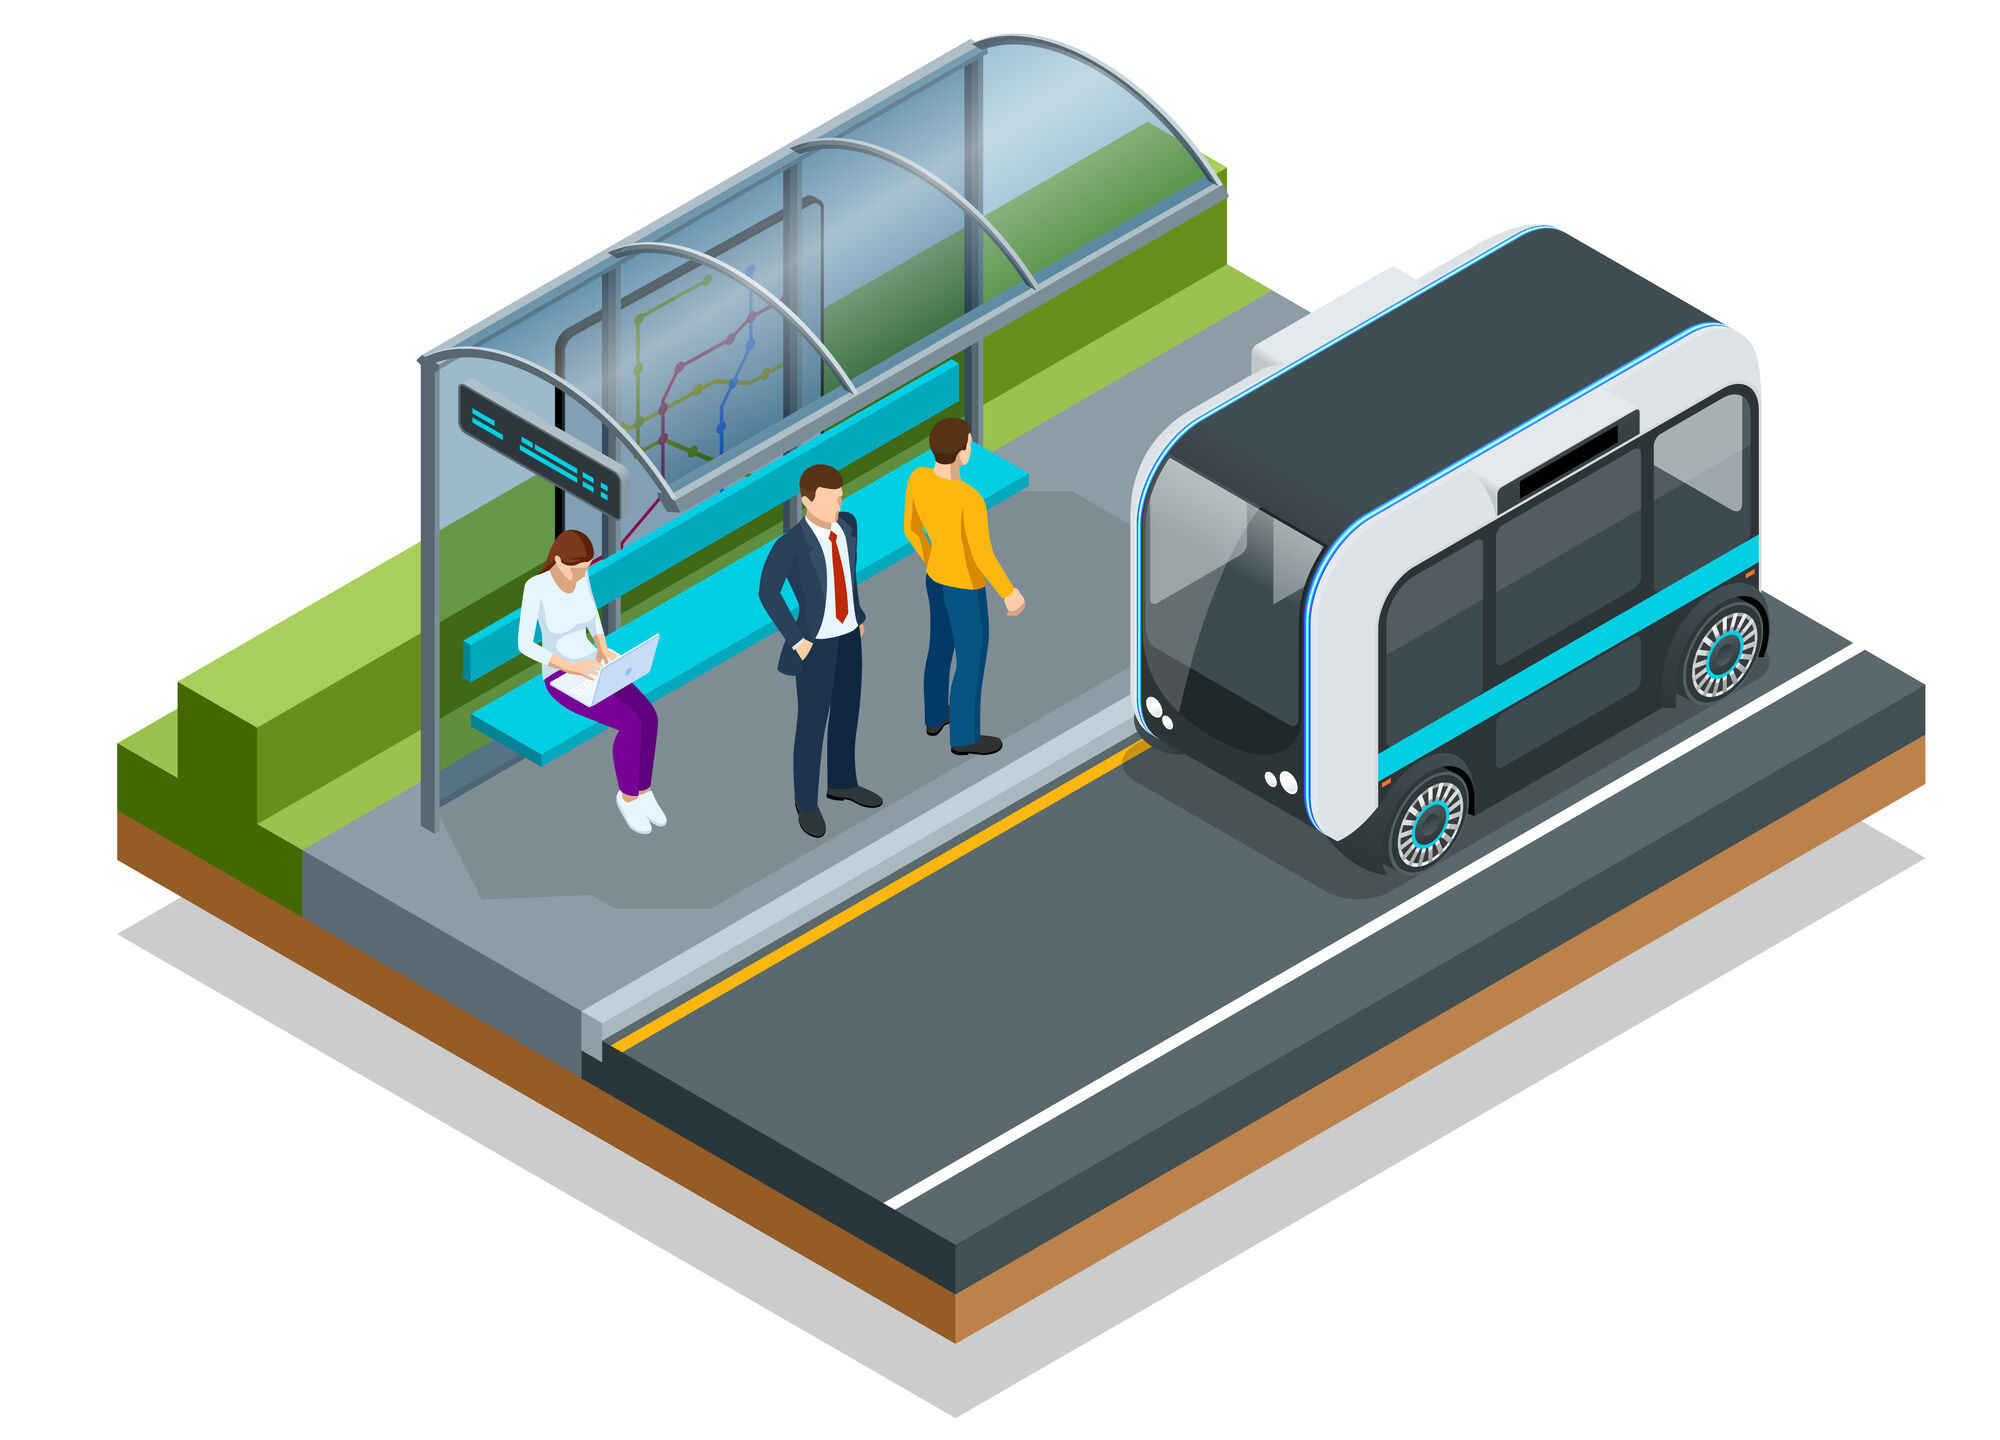 3D drawing of a driverless bus stop